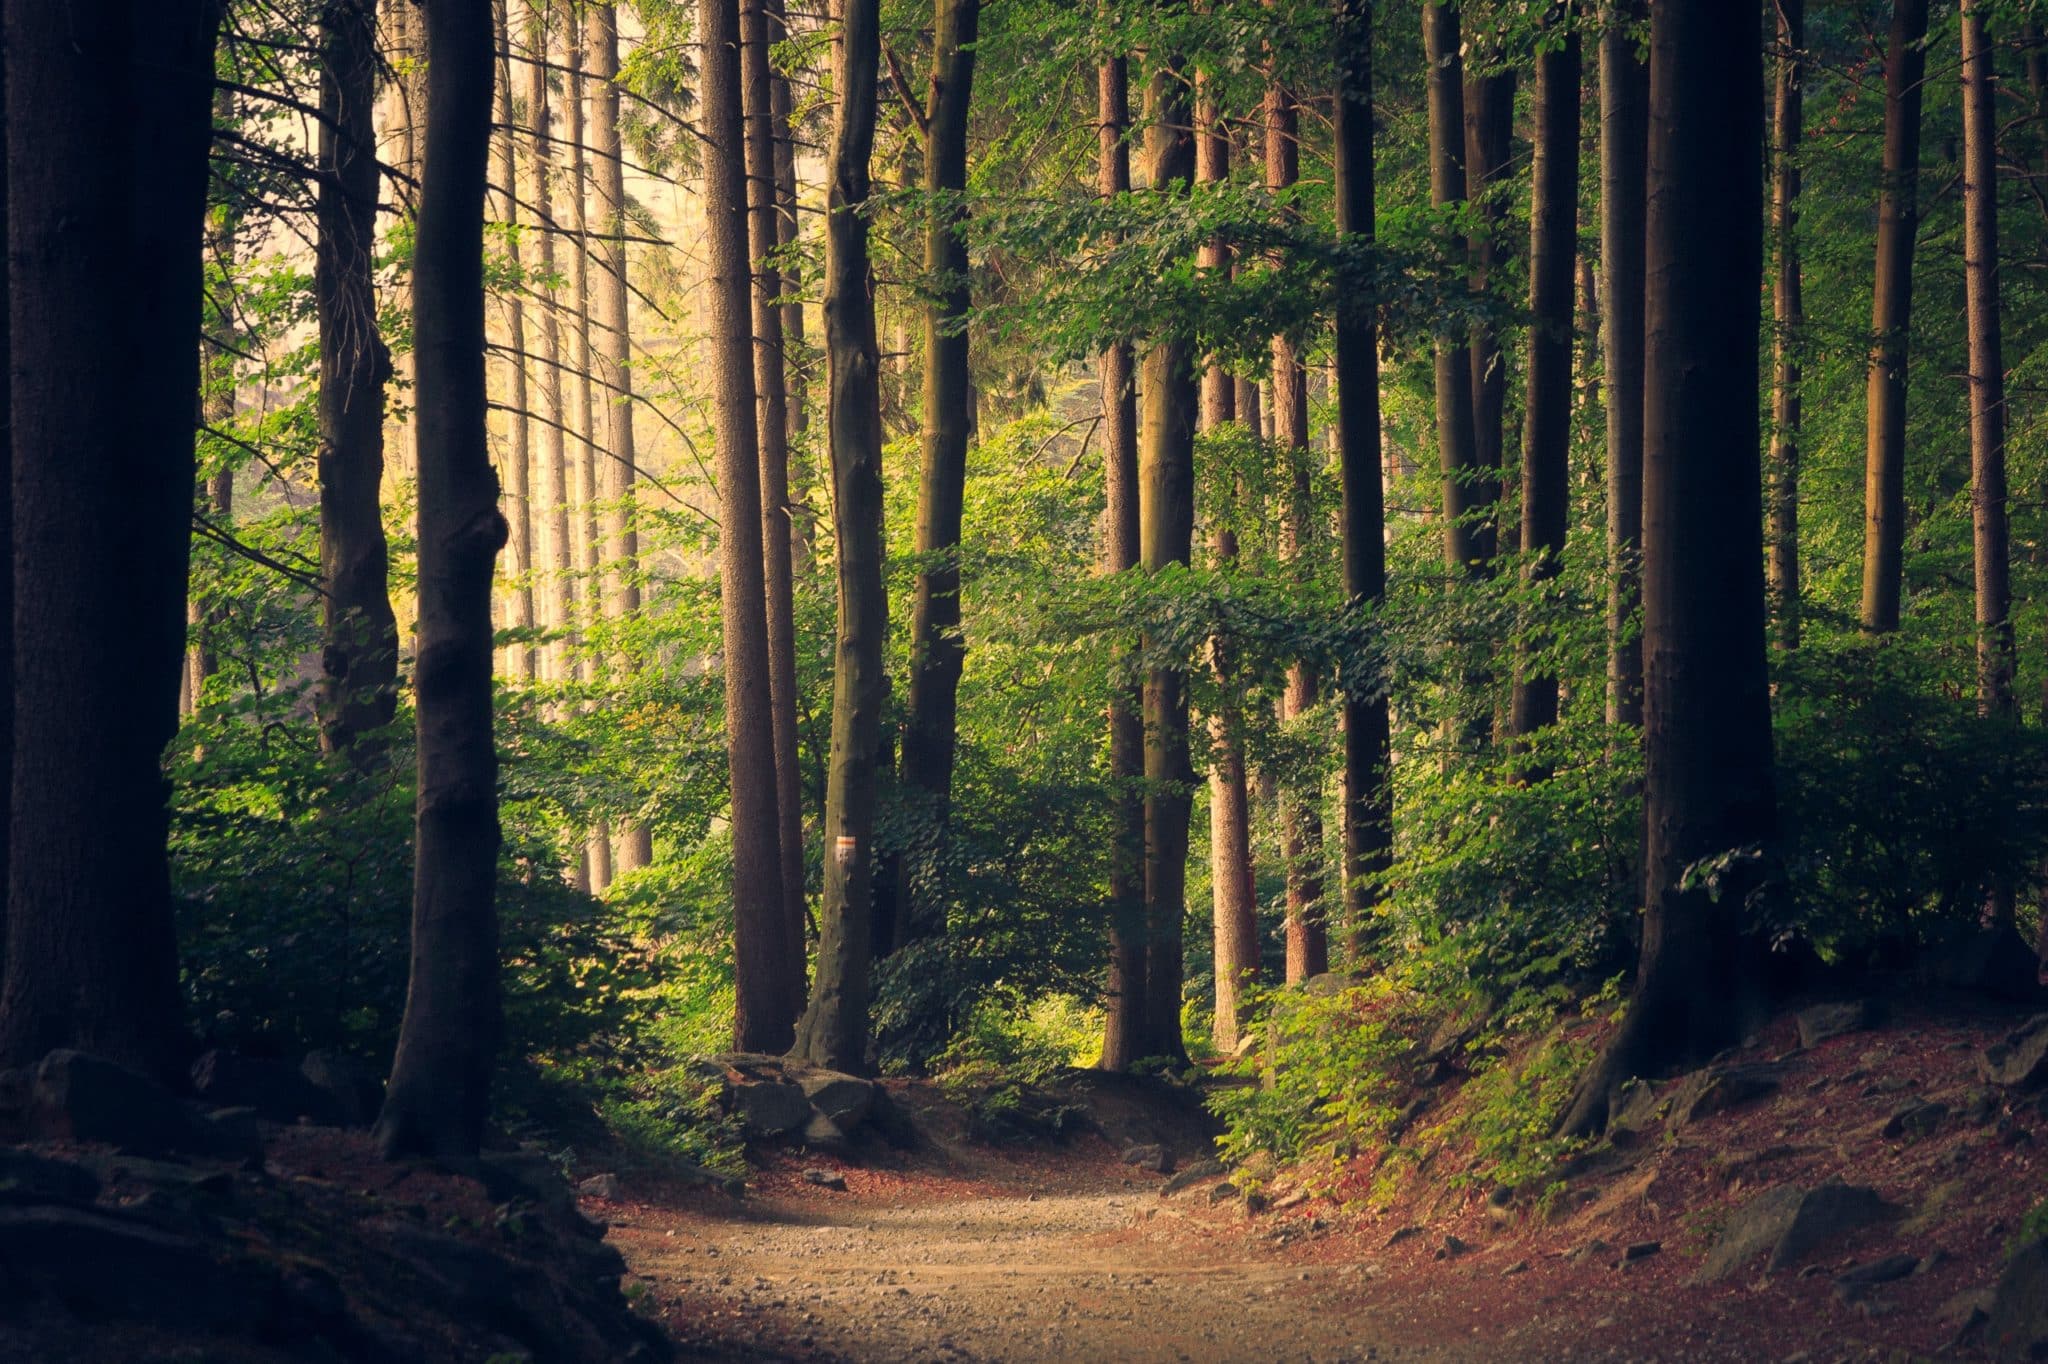 woodland pathway amongst a forest of tall trees